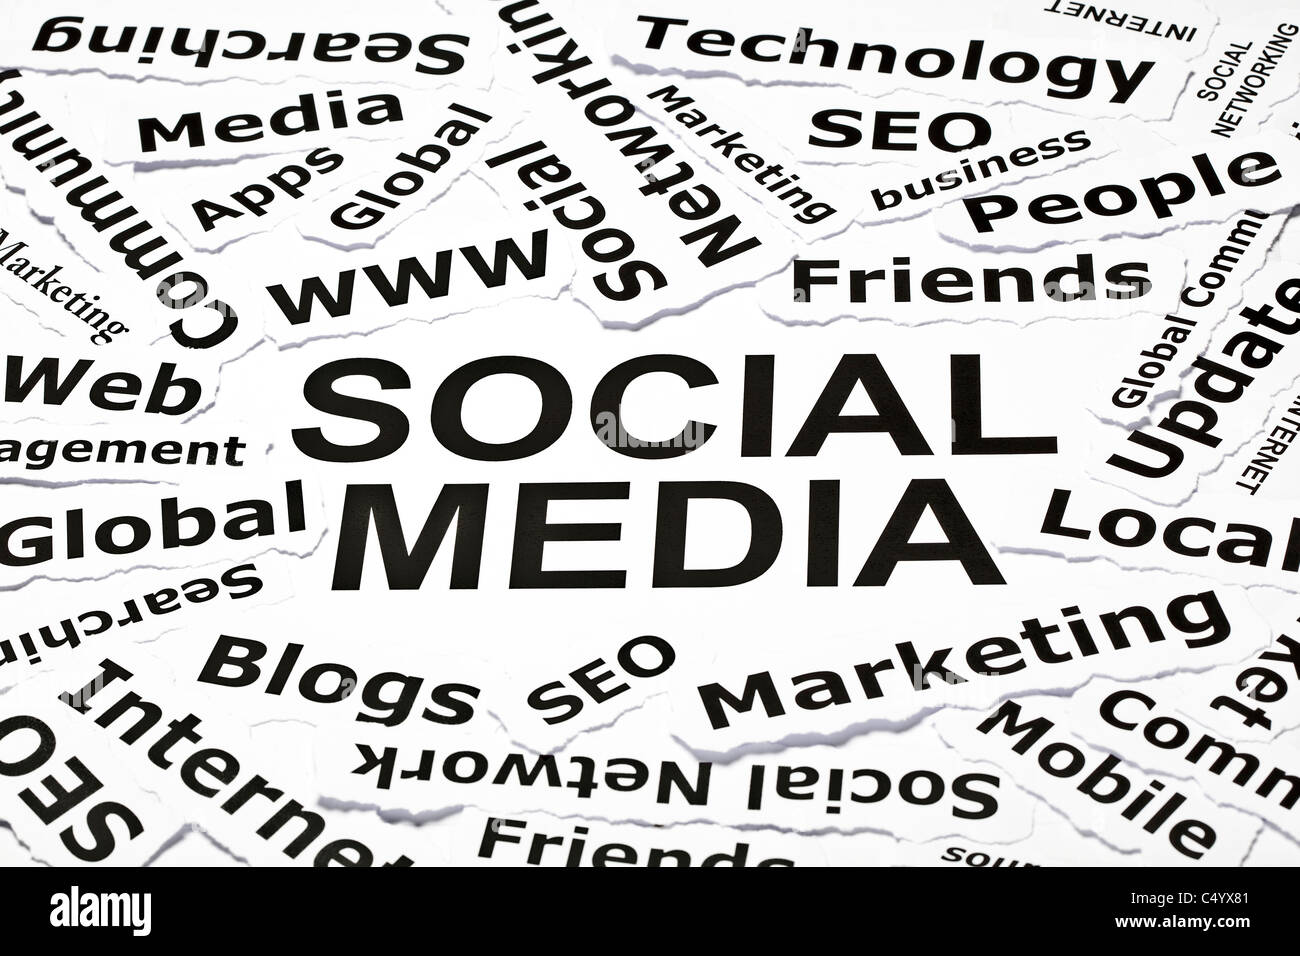 'Social media' concept with other related words Stock Photo